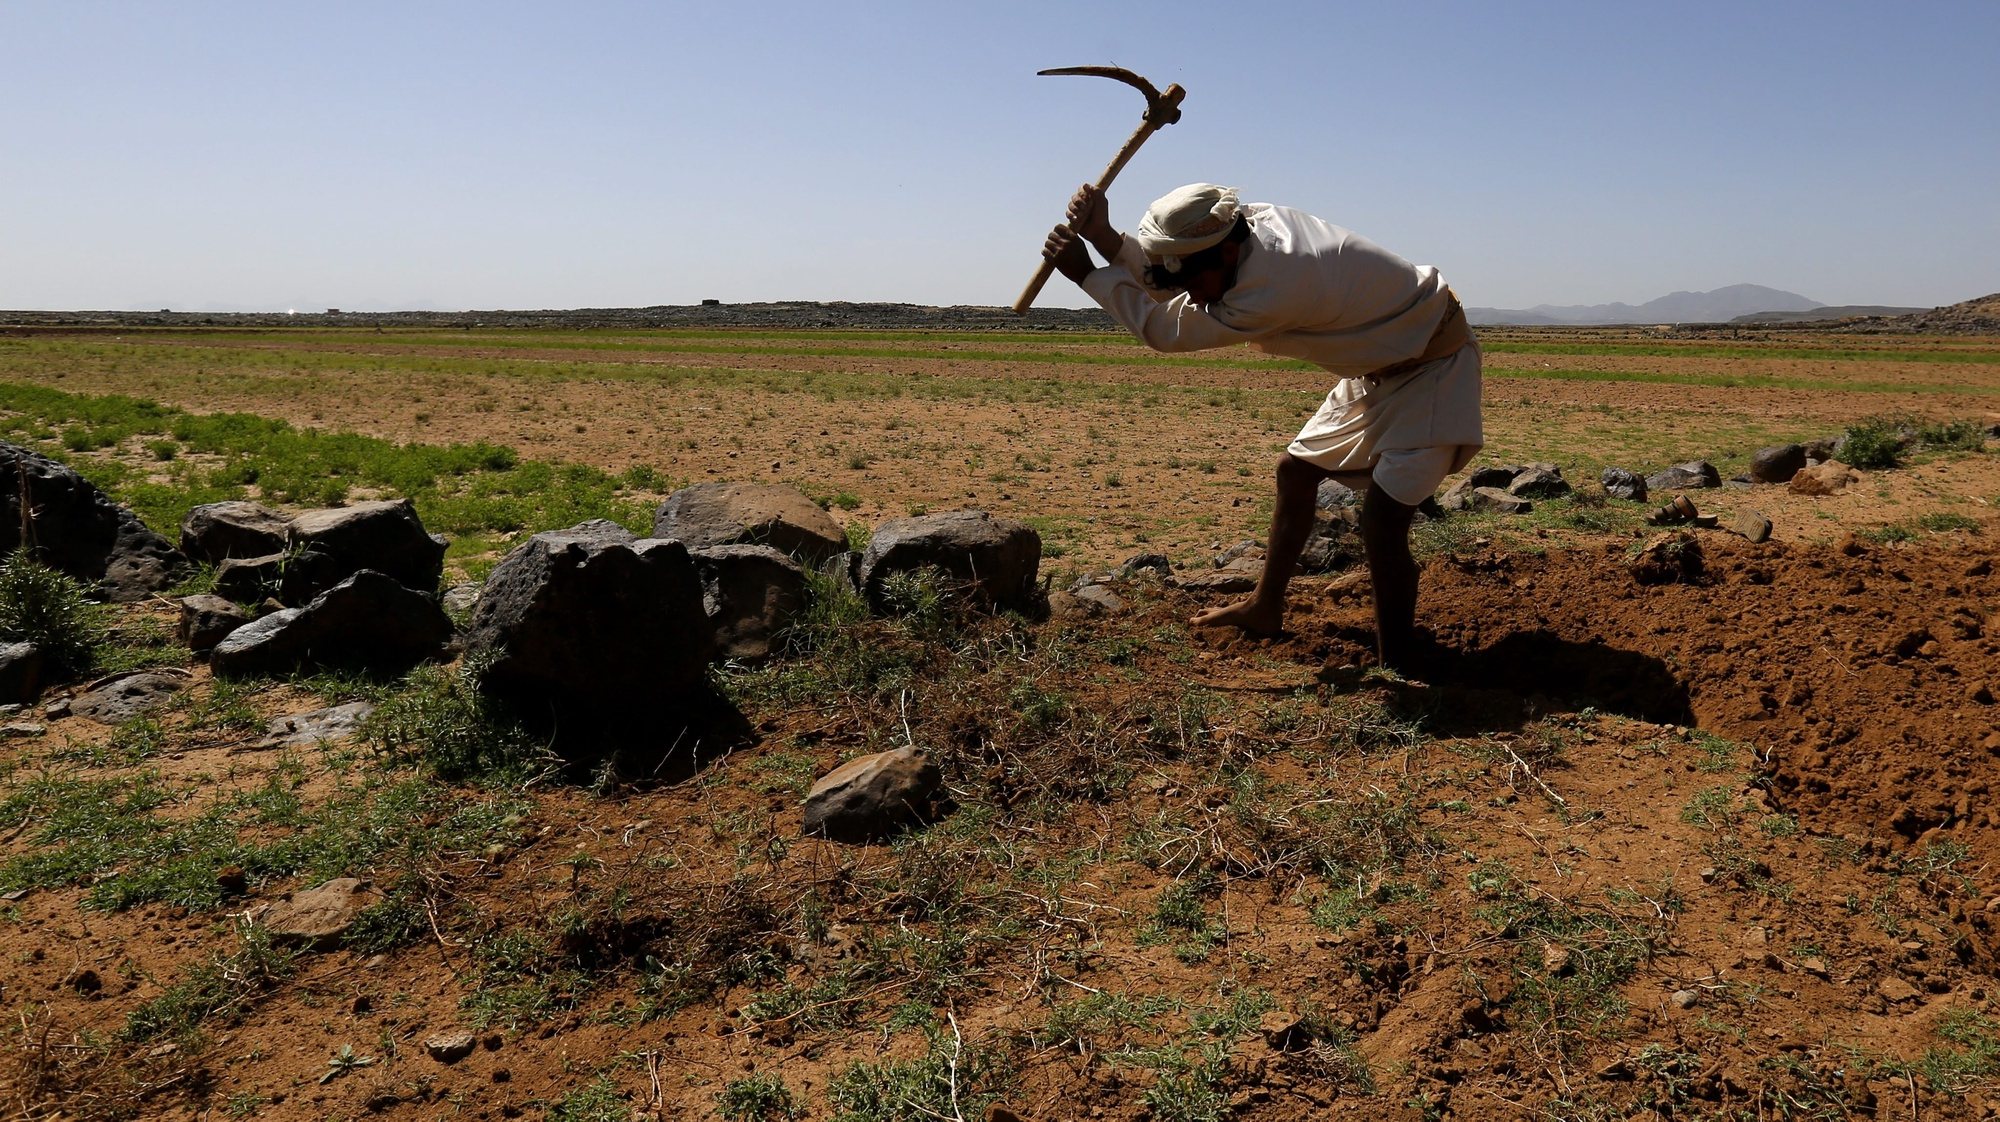 epa05304407 A Yemeni farmer uses a grubber to break the soil of dry farmland near Hamdan district on the outskirts of Sana&#039;a, Yemen, 13 May 2016. According to reports, the Food and Agriculture Organization (FAO) has reported around 14.4 million people, over half of Yemen&#039;s population, urgently need food security and livelihood assistance, after more than a year of war between Yemen’s Saudi-backed government and Houthi rebels, pushing the war-affected country to the brink of humanitarian disaster.  EPA/YAHYA ARHAB